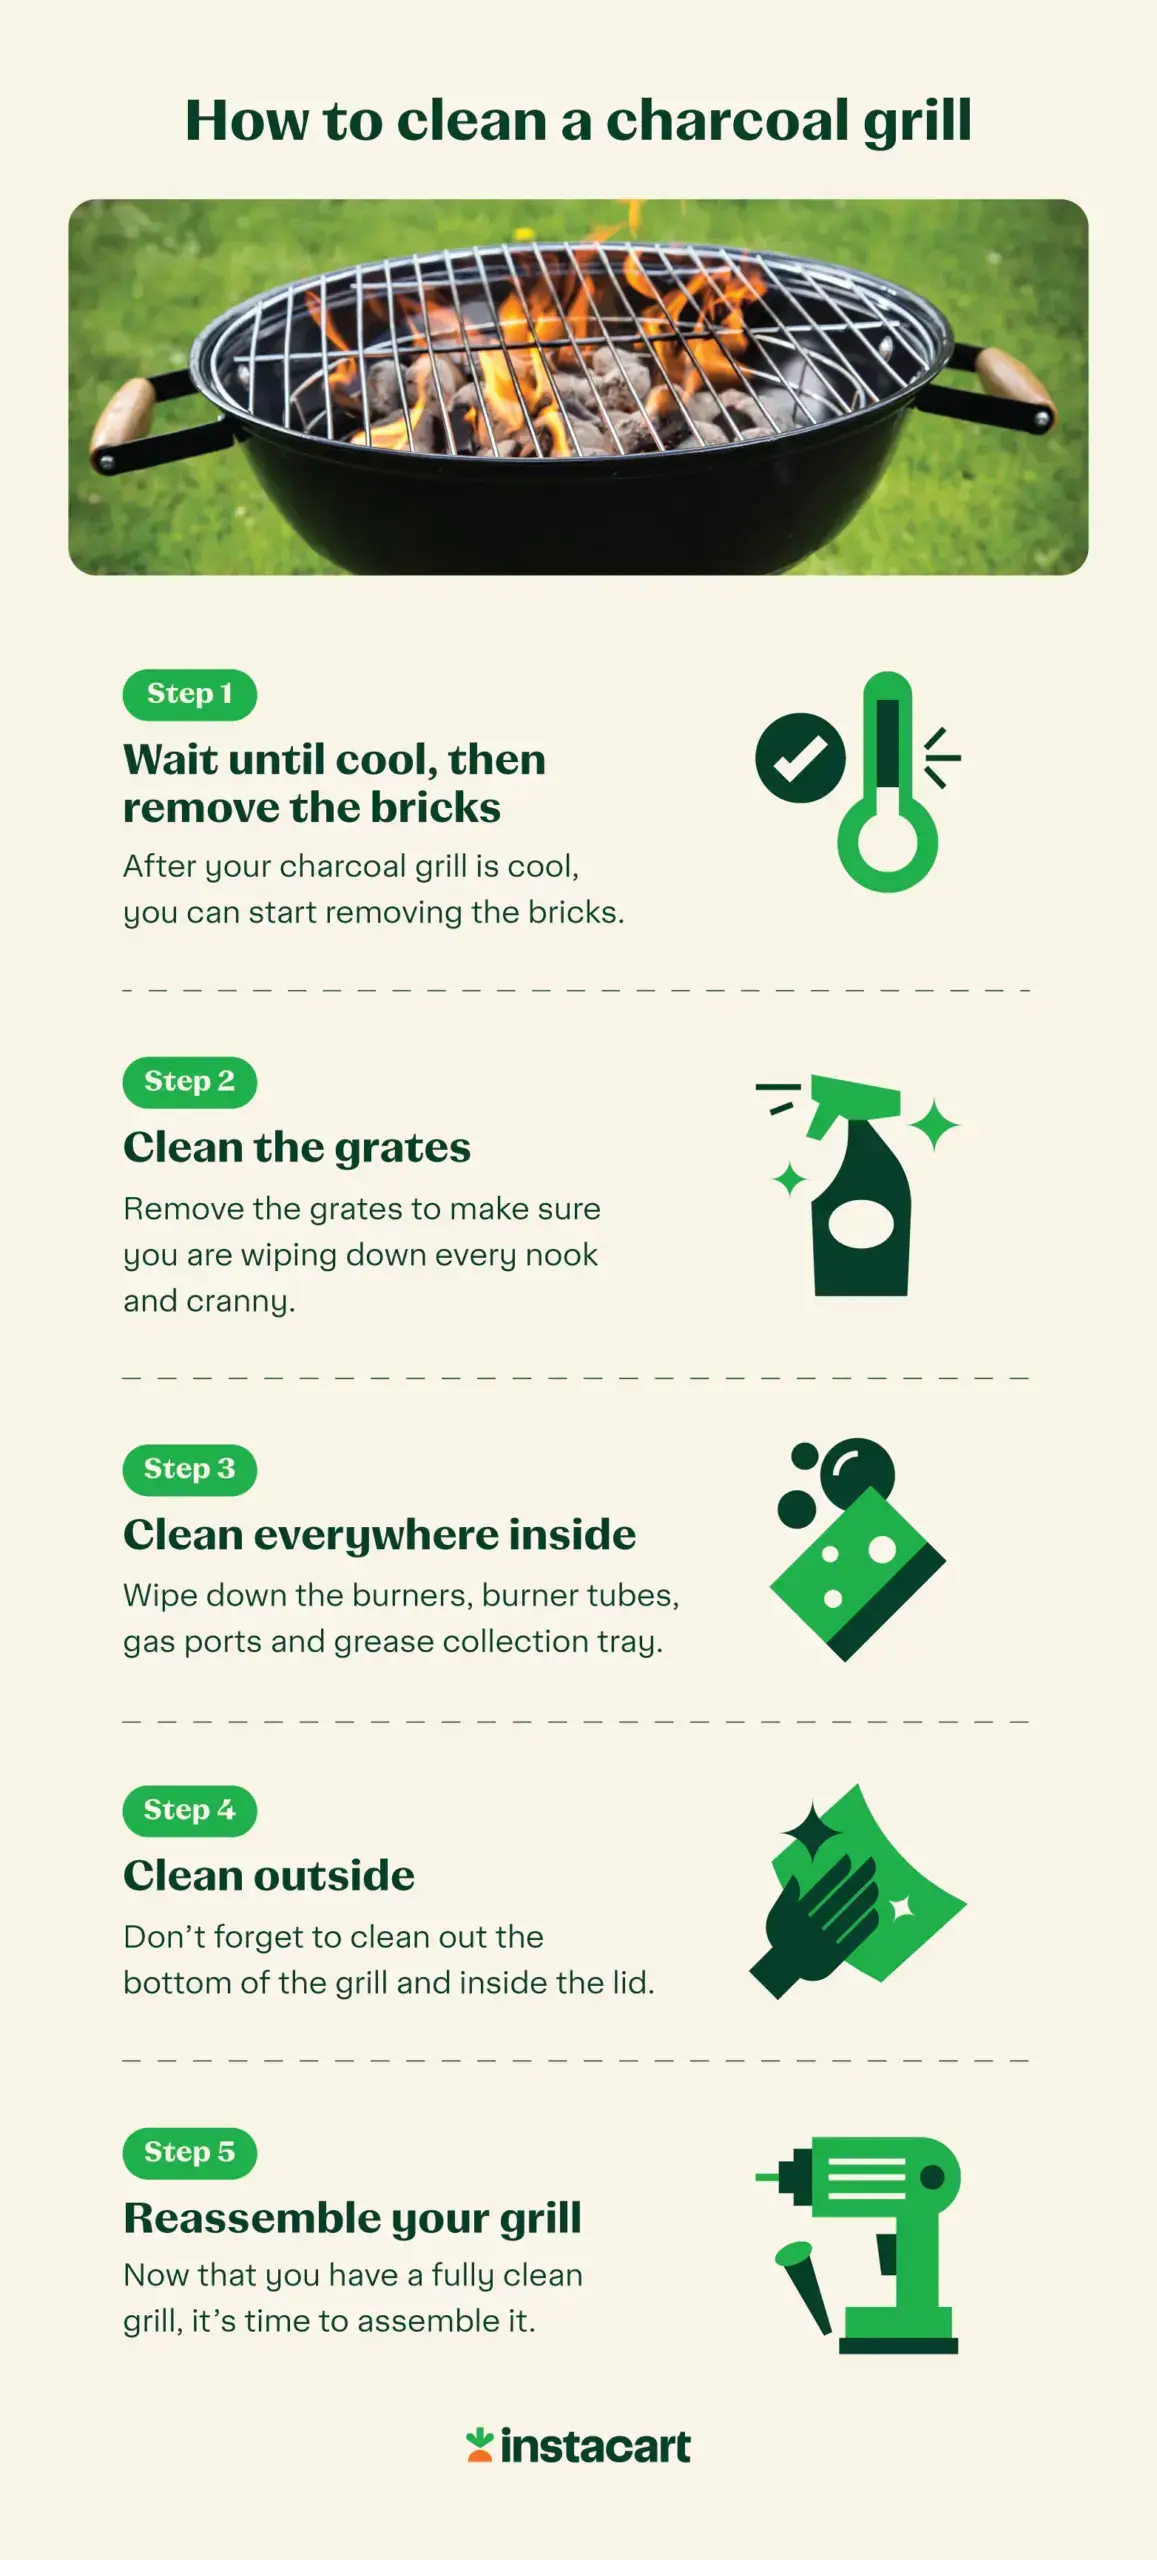 How to Clean a BBQ - The Only BBQ Guide You'll Ever Need!